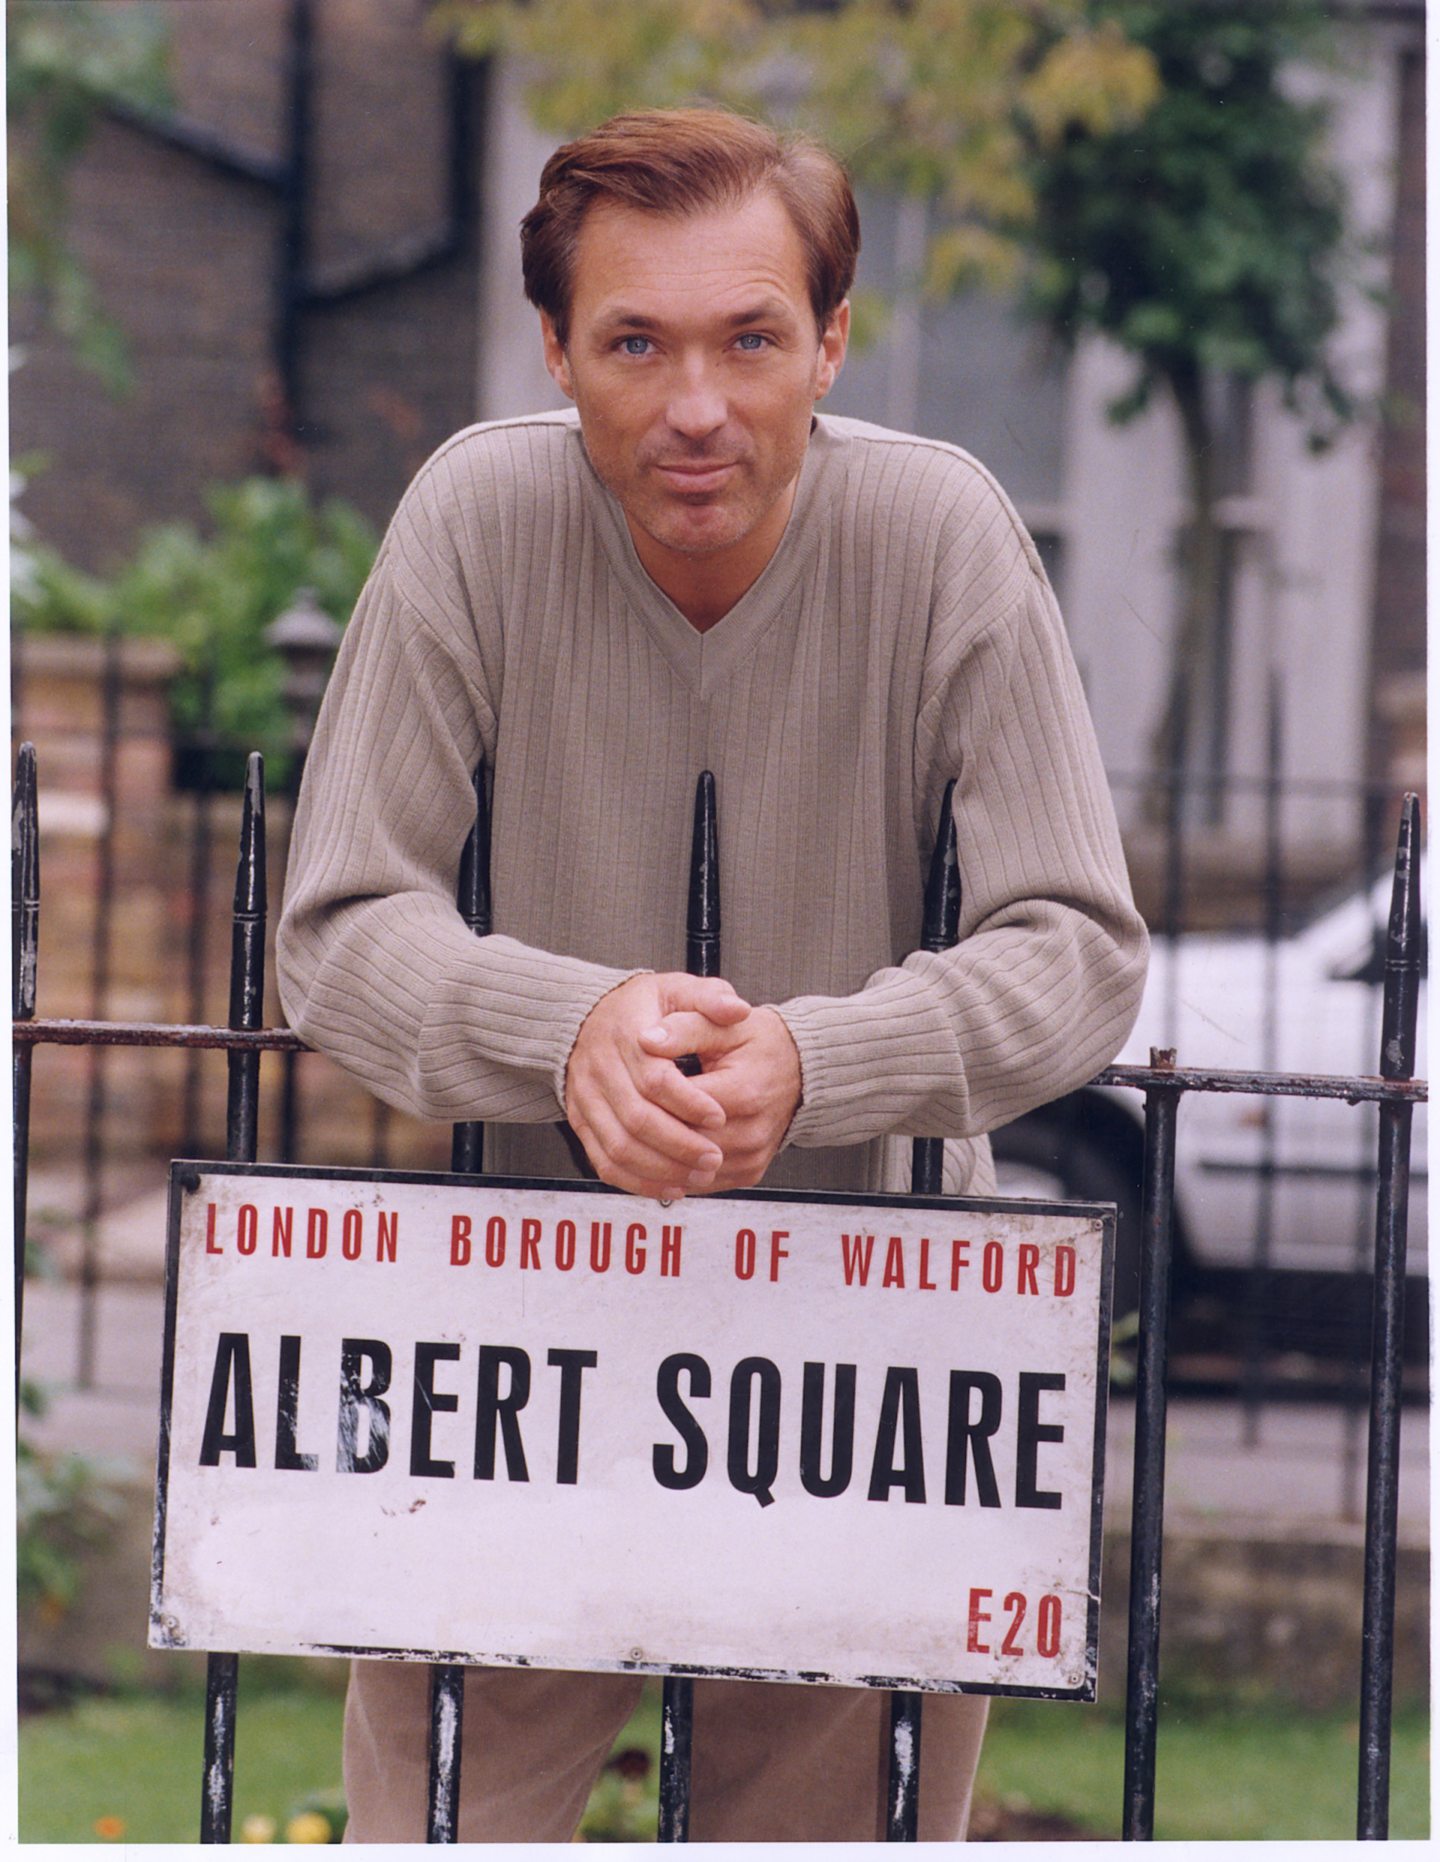 Martin Kemp made his mark on Albert Square when he arrived as Steve Owen in 1998. Image: Supplied.